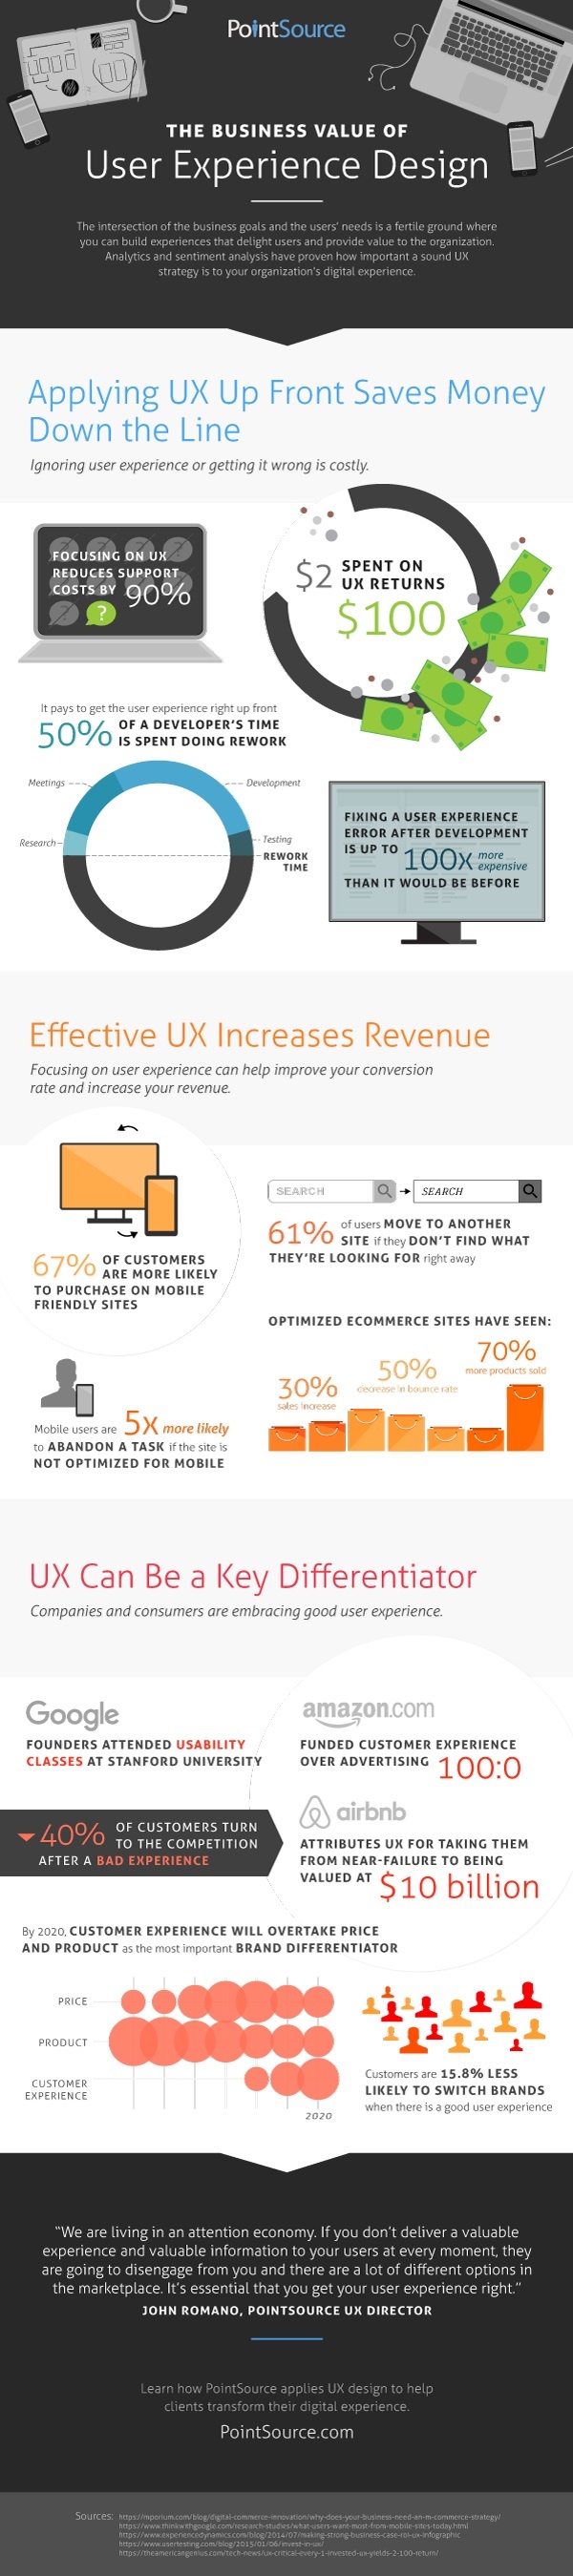 The Business Value of User Experience Design